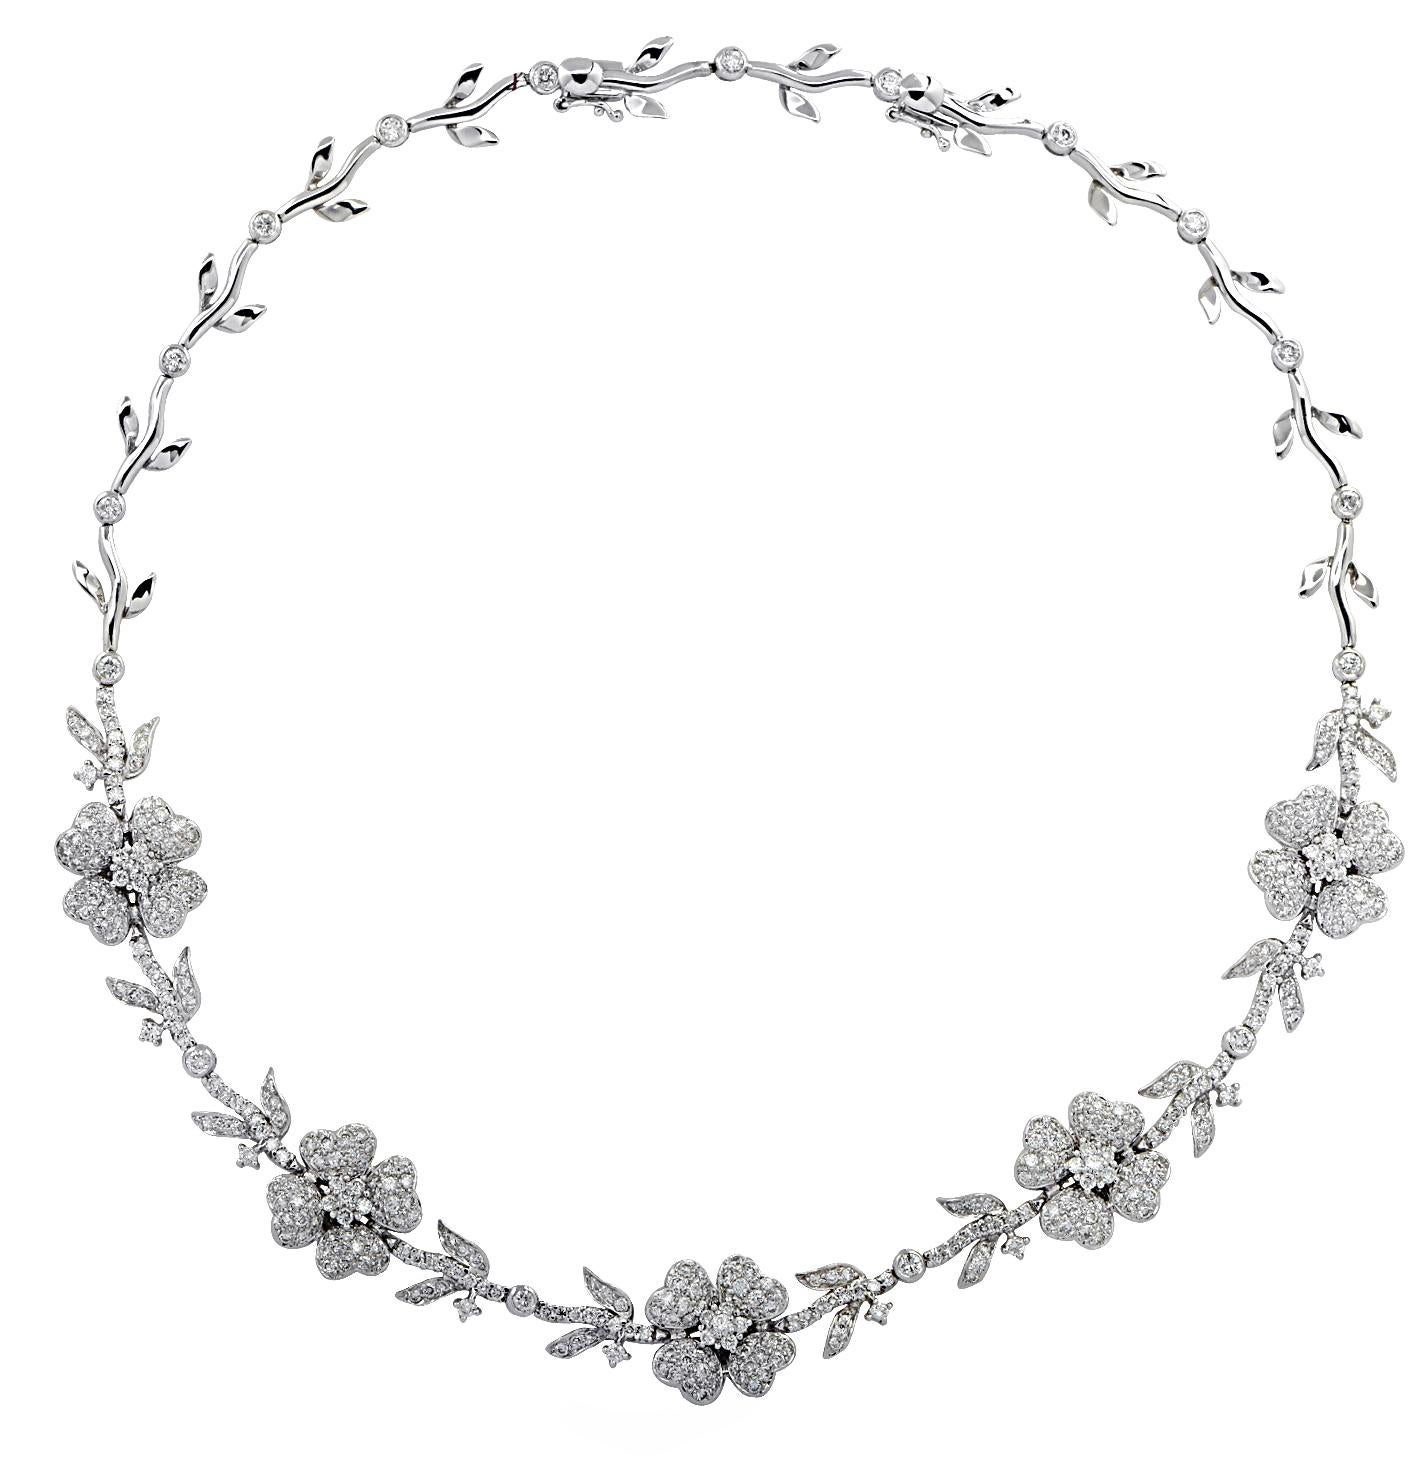 Enchanting necklace crafted in 18 karat white gold, featuring 280 round brilliant cut diamonds weighing approximately 5.75 carats total, G-H color, VS-SI clarity. A delightful diamond encrusted flower garland dances around the neck, capturing the